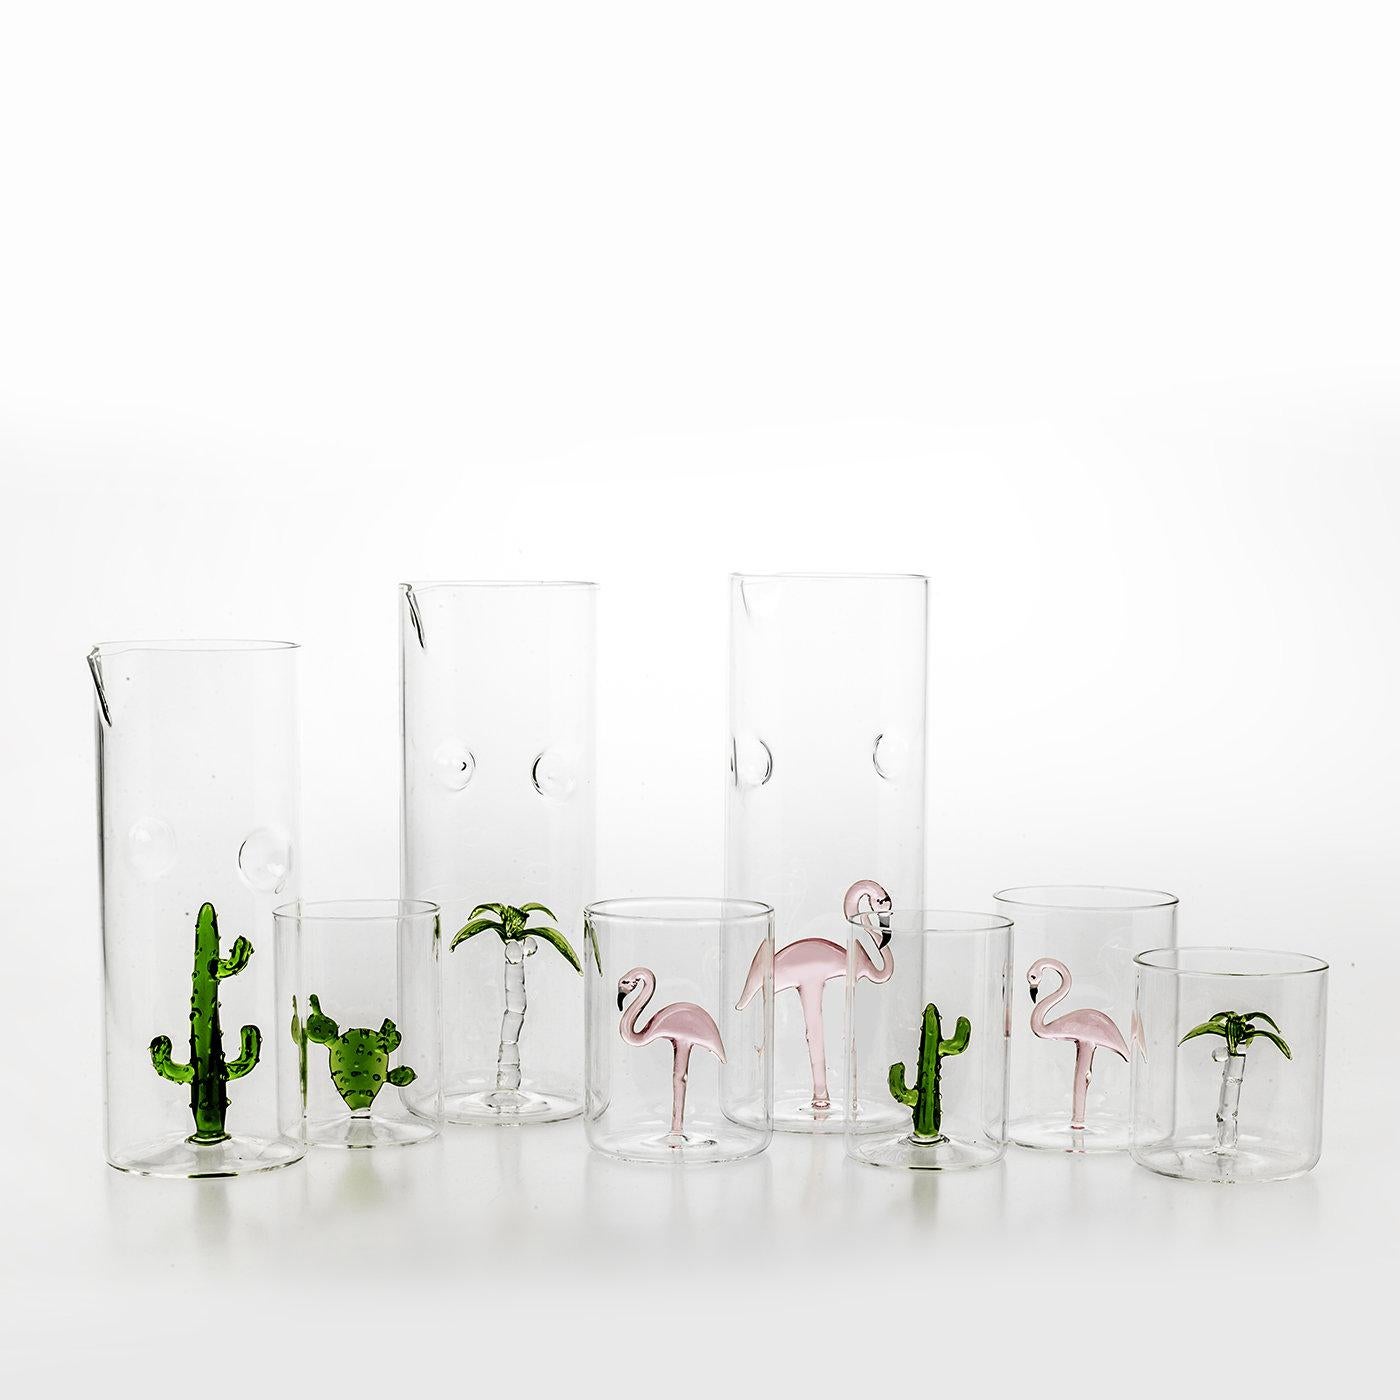 This set of four glasses was crafted by hand and inspired by the stunning colors of tropical nature. The four clear glasses are versatile and suitable for any occasion and each inside boasts a glass sculpture that was hand-painted in white, black,